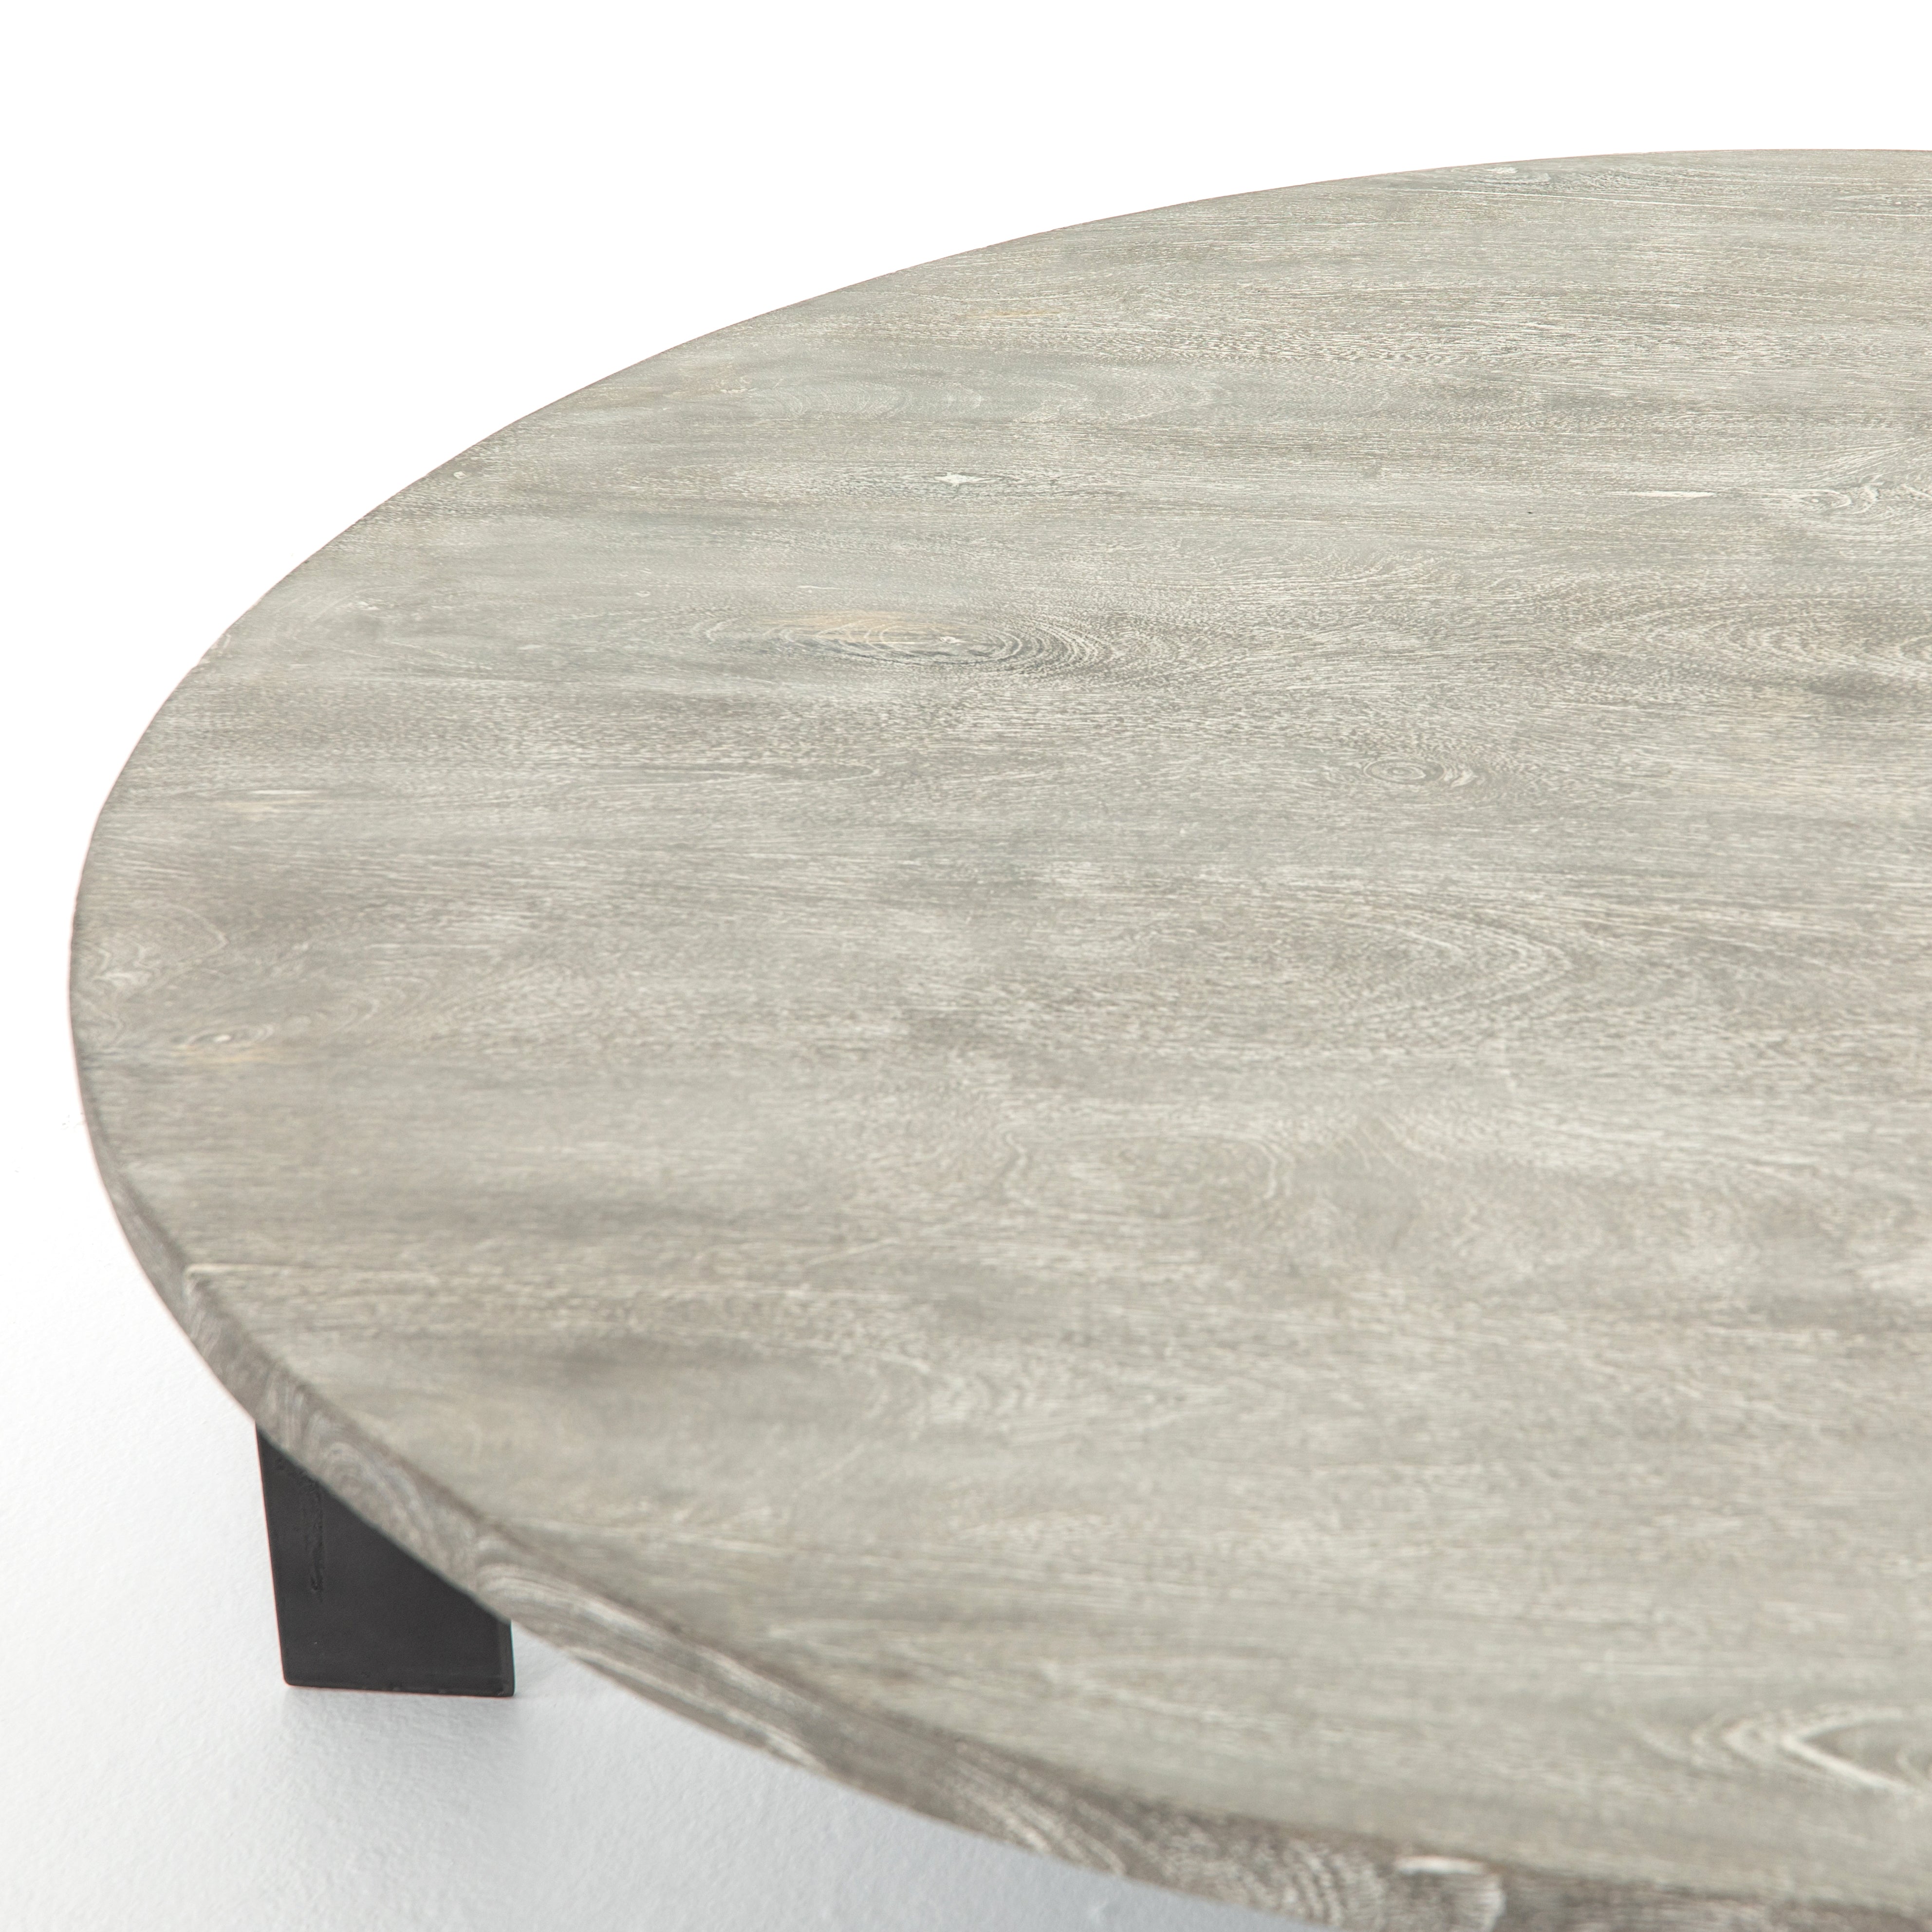 We love the thin iron gunmetal legs of this Round Coffee Table with Iron. The charcoal tones bring a neutral tone to any living room or lounge area.   Overall Dimensions: 48.00"w x 48.00"d x 15.50"h   Colors: Gunmetal, Charcoal Materials: Iron, Mango Wood Weight: 75.51 lb